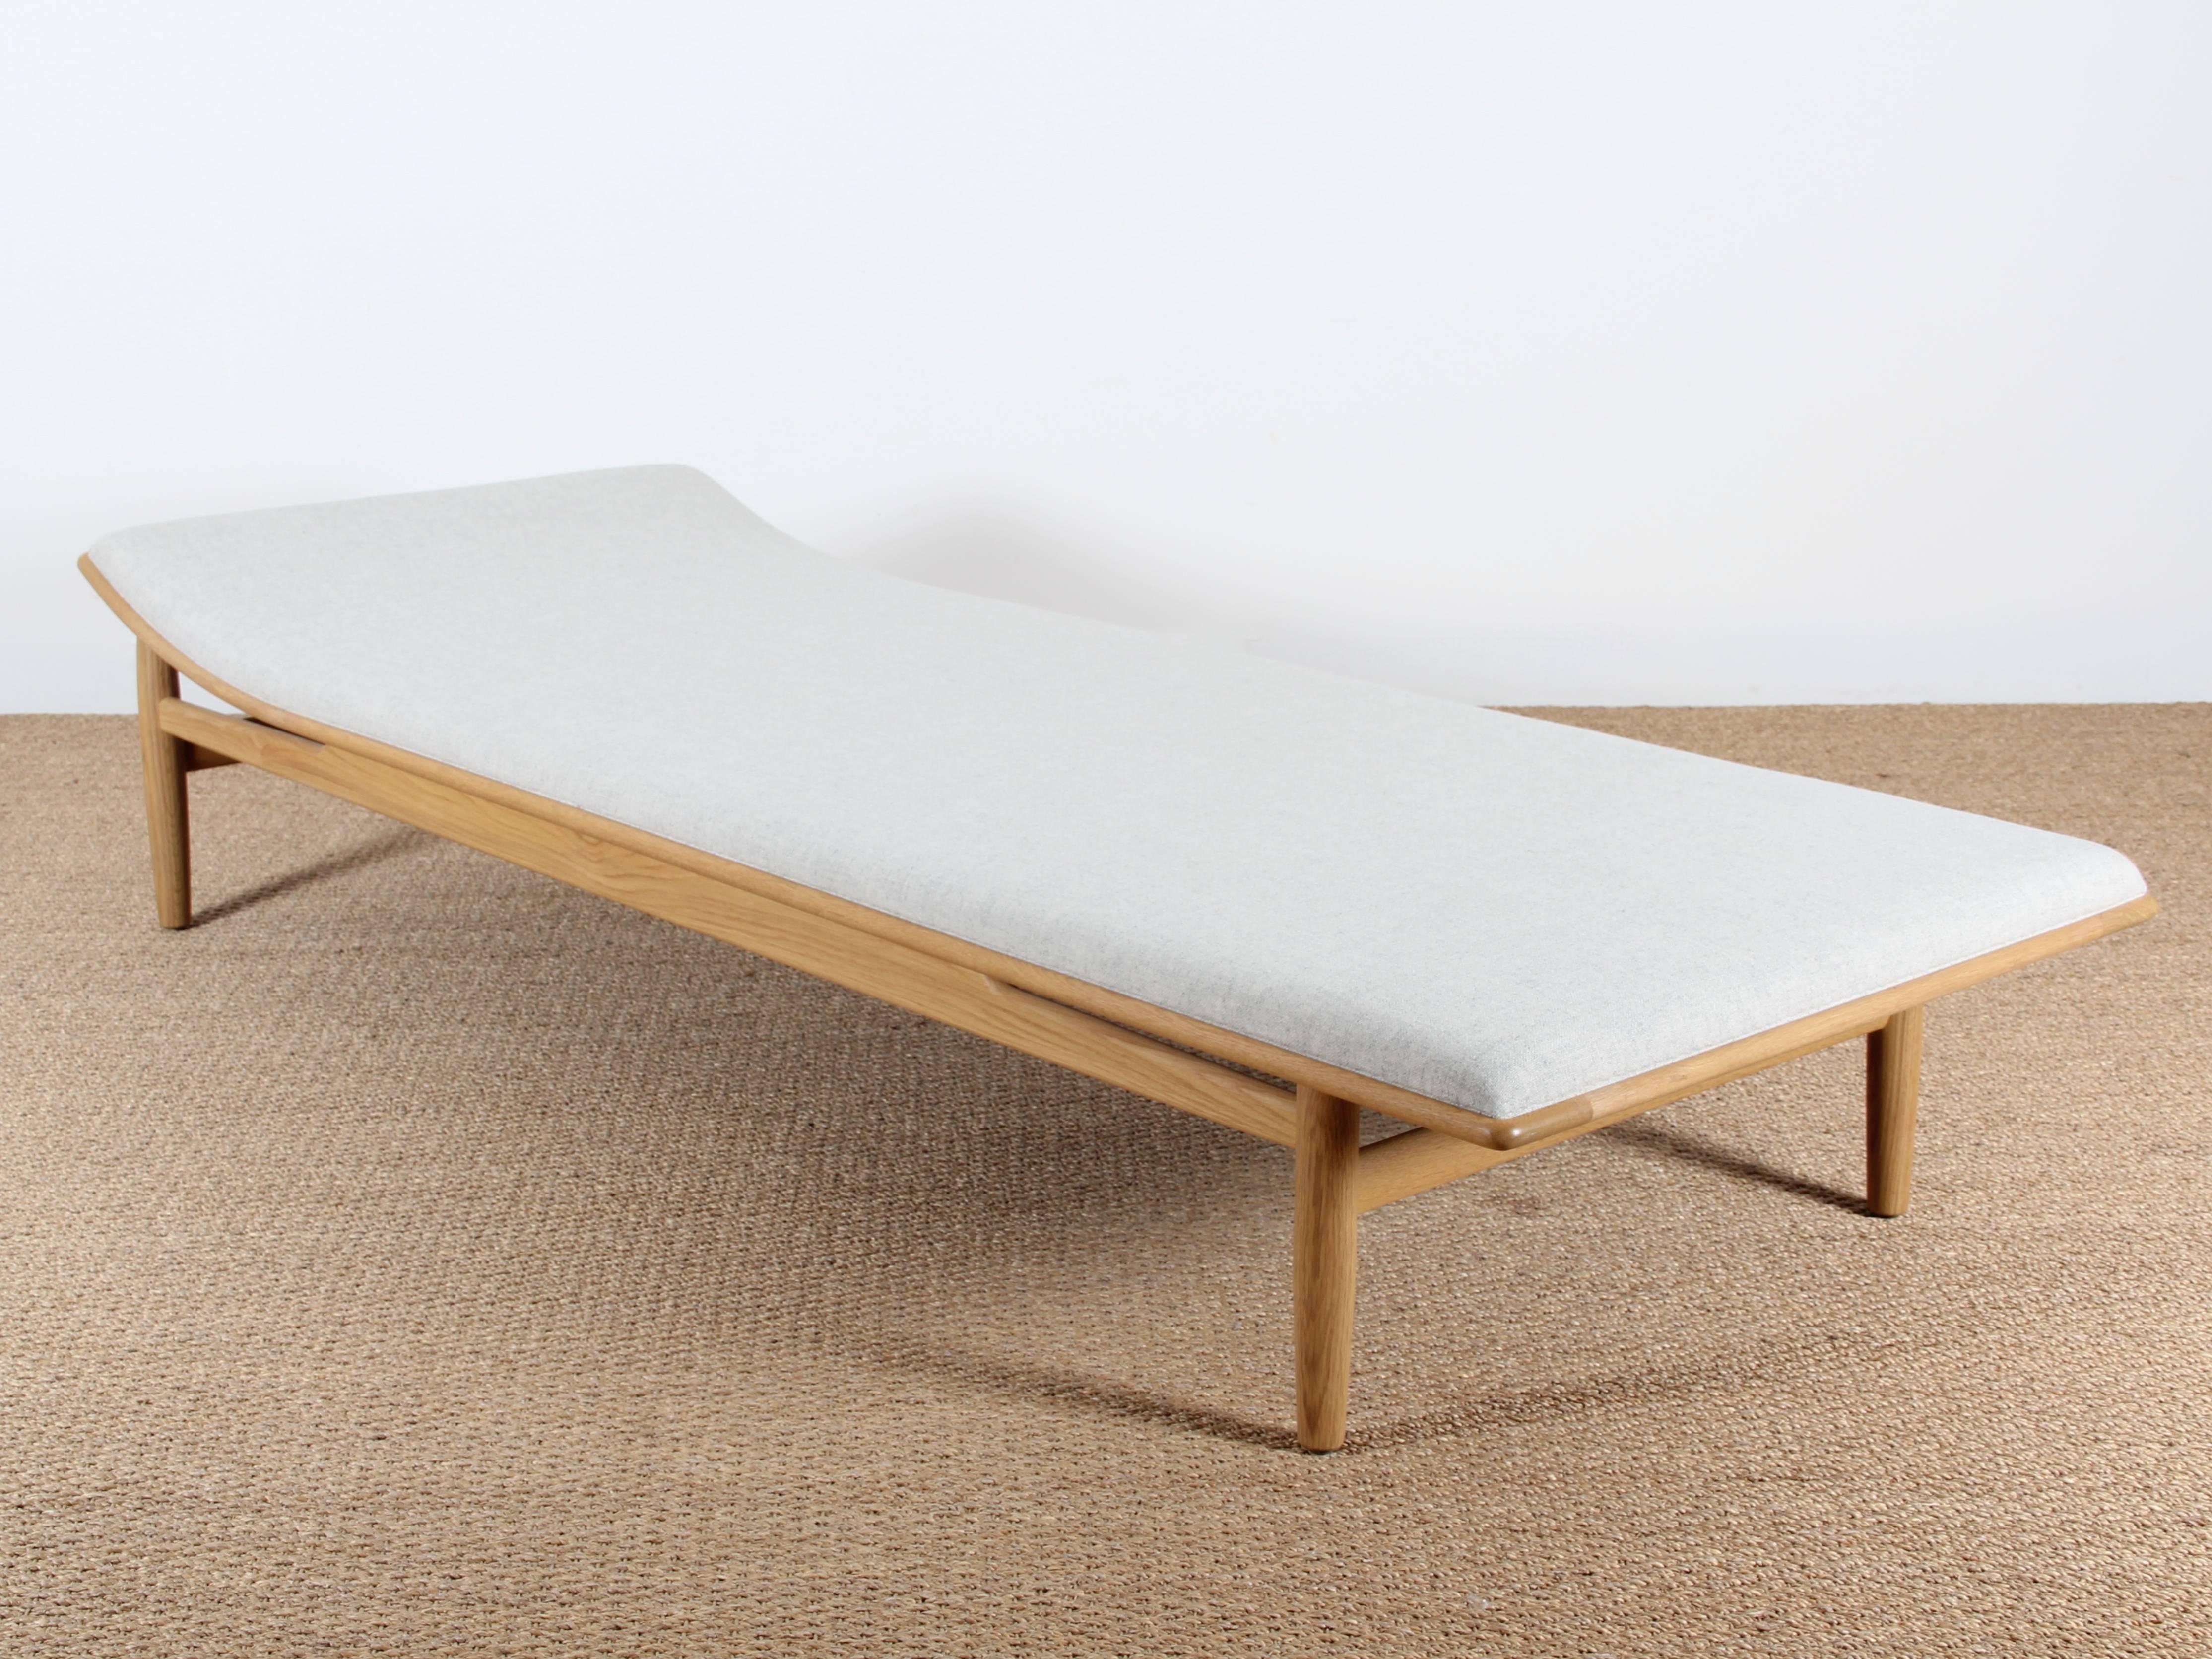 Kurt Ostervig day bed in solid walnut covered with wool fabric Divina light gray melange of Kvadrat.

First published in 1958 by Jason Møbler, this mythical day bed is now reissued by the Danish Matzform, licensing and authorization of rights